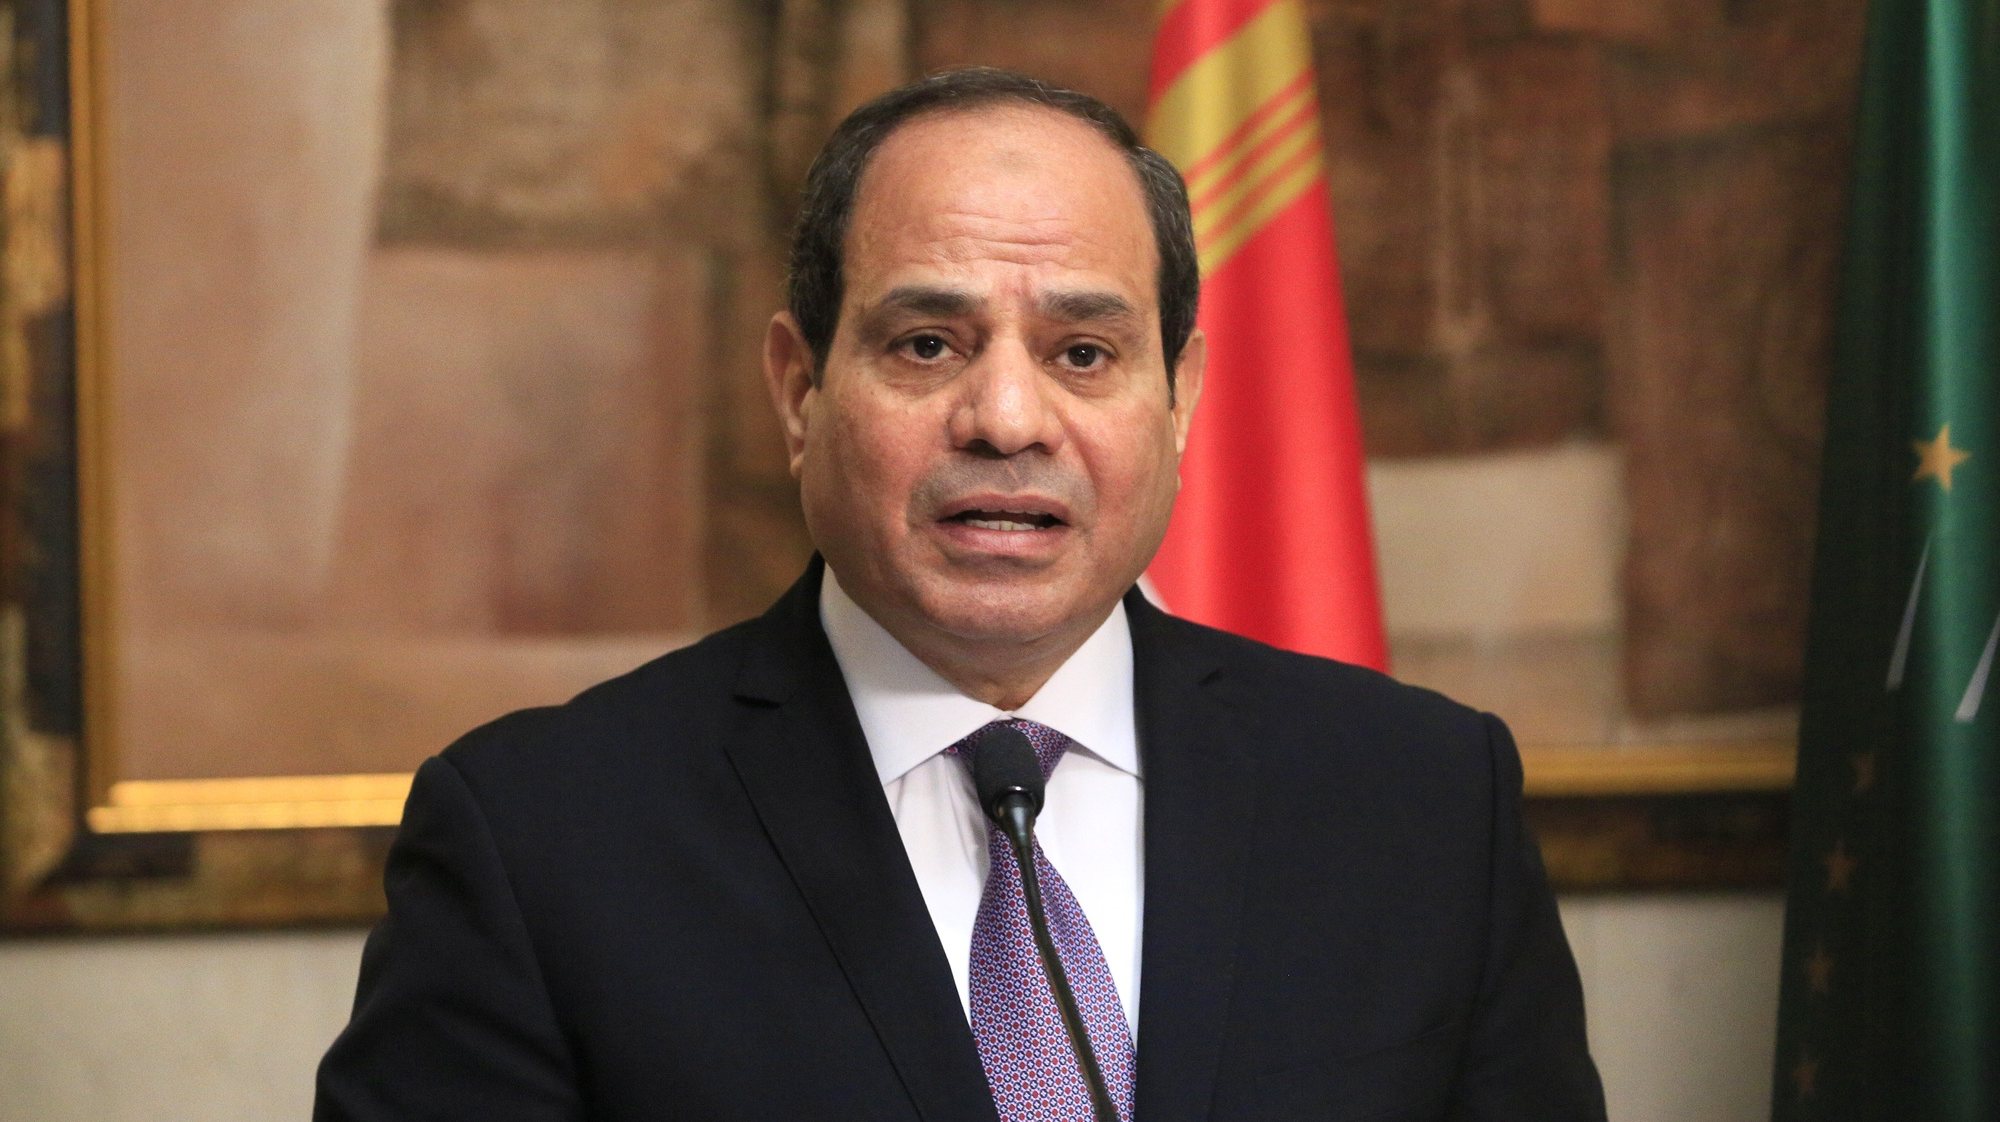 epa07498774 Egypt&#039;s President Abdel Fattah al-Sissi speaks at the presidential palace in Abidjan during a welcoming ceremony in Abijan, Ivory Coast, 11 April 2019. The President of the Arab Republic of Egypt Abdel Fattah Al-Sissi arrived Wednesday evening in Abidjan where he makes a visit of friendship and work of 48 hours. This visit of the Egyptian president in Ivory Coast is part of the part of a West African tour he began Sunday in Guinea. After the Ivorian stage, Abdel Fattah Al-Sissi is expected in Senegal.  EPA/LEGNAN KOULA